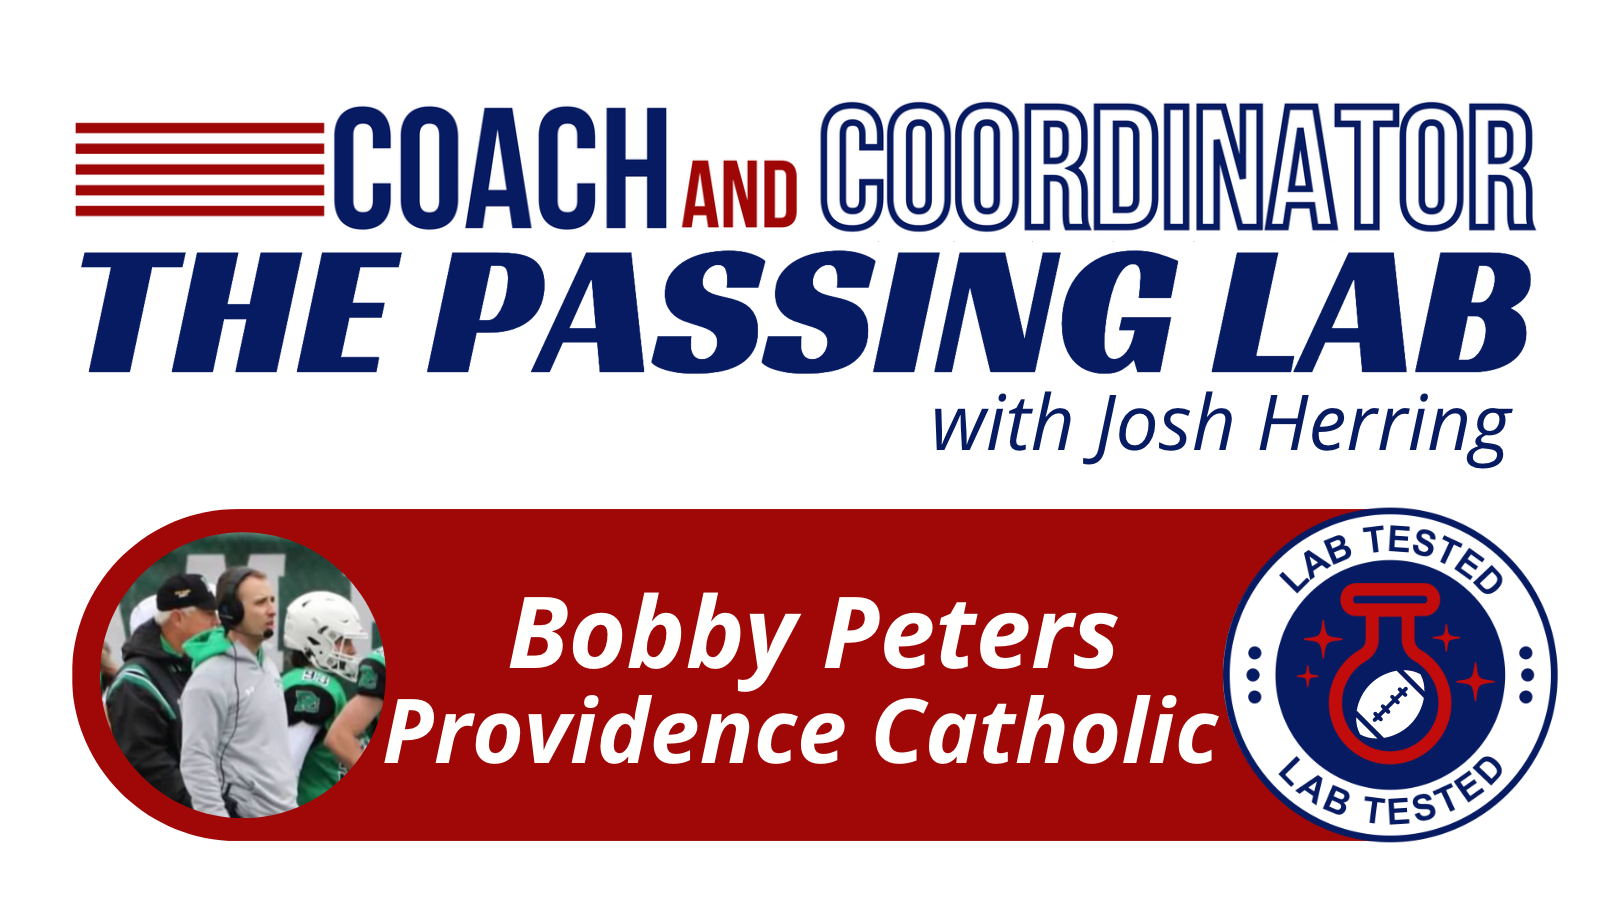 The Passing Lab Featuring Bobby Peters